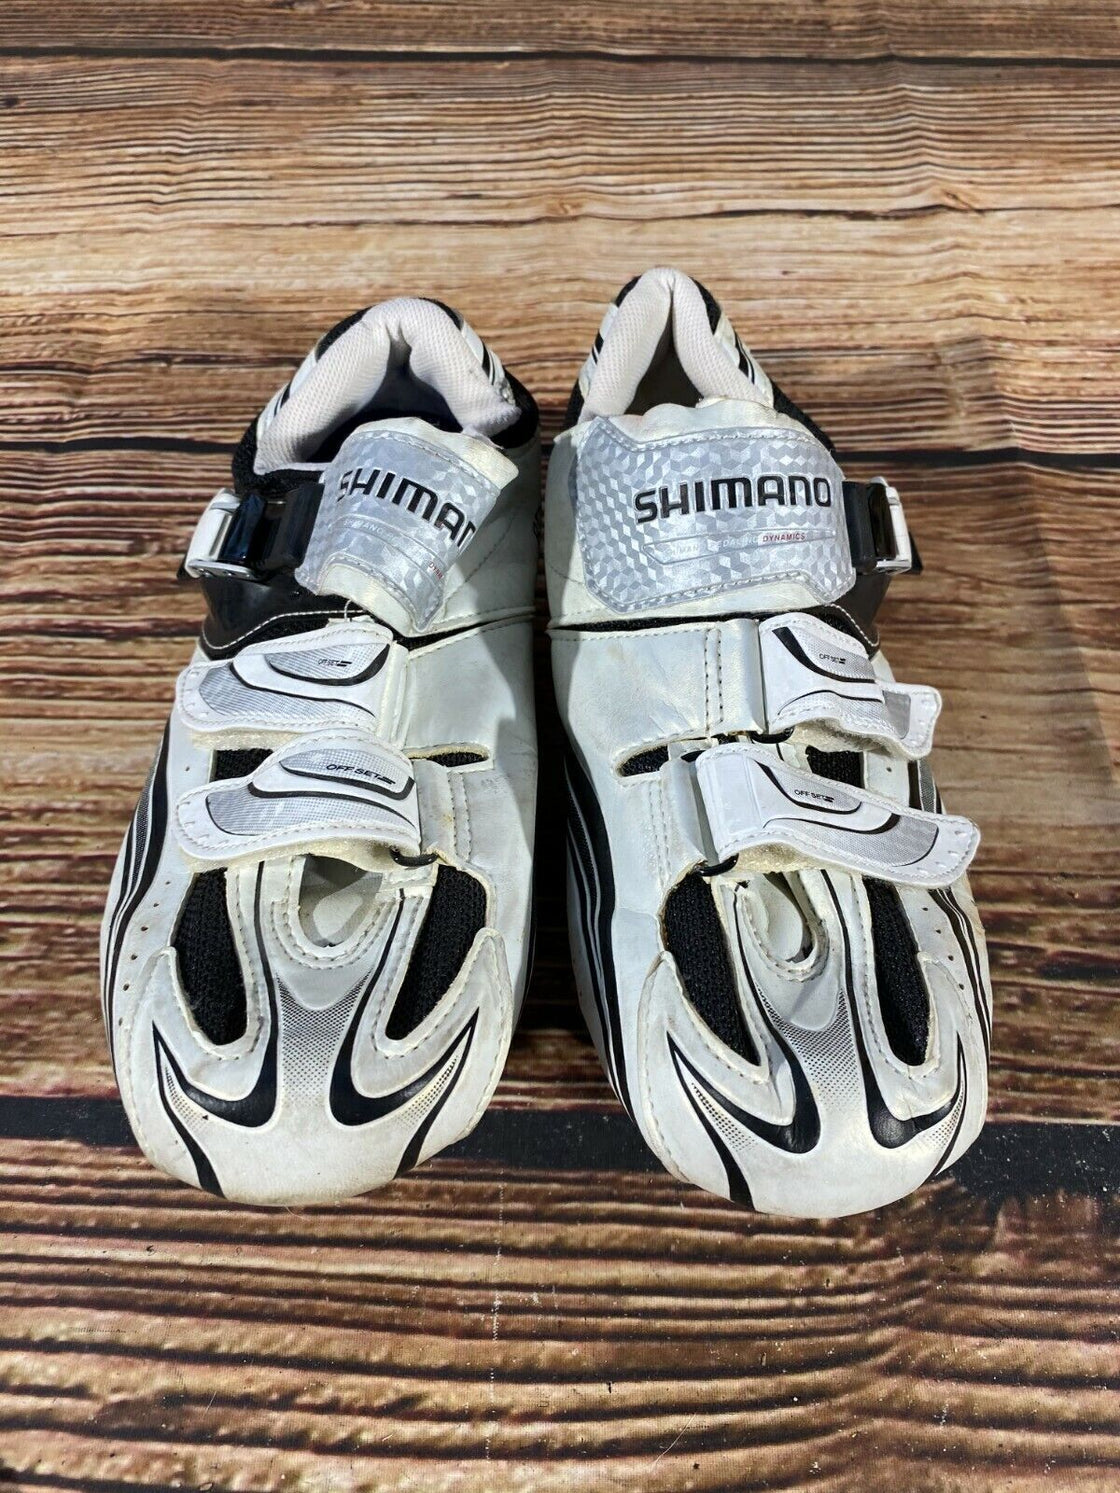 SHIMANO R087 Road Cycling Shoes Clipless Biking Boots Size EU 42 with Cleats